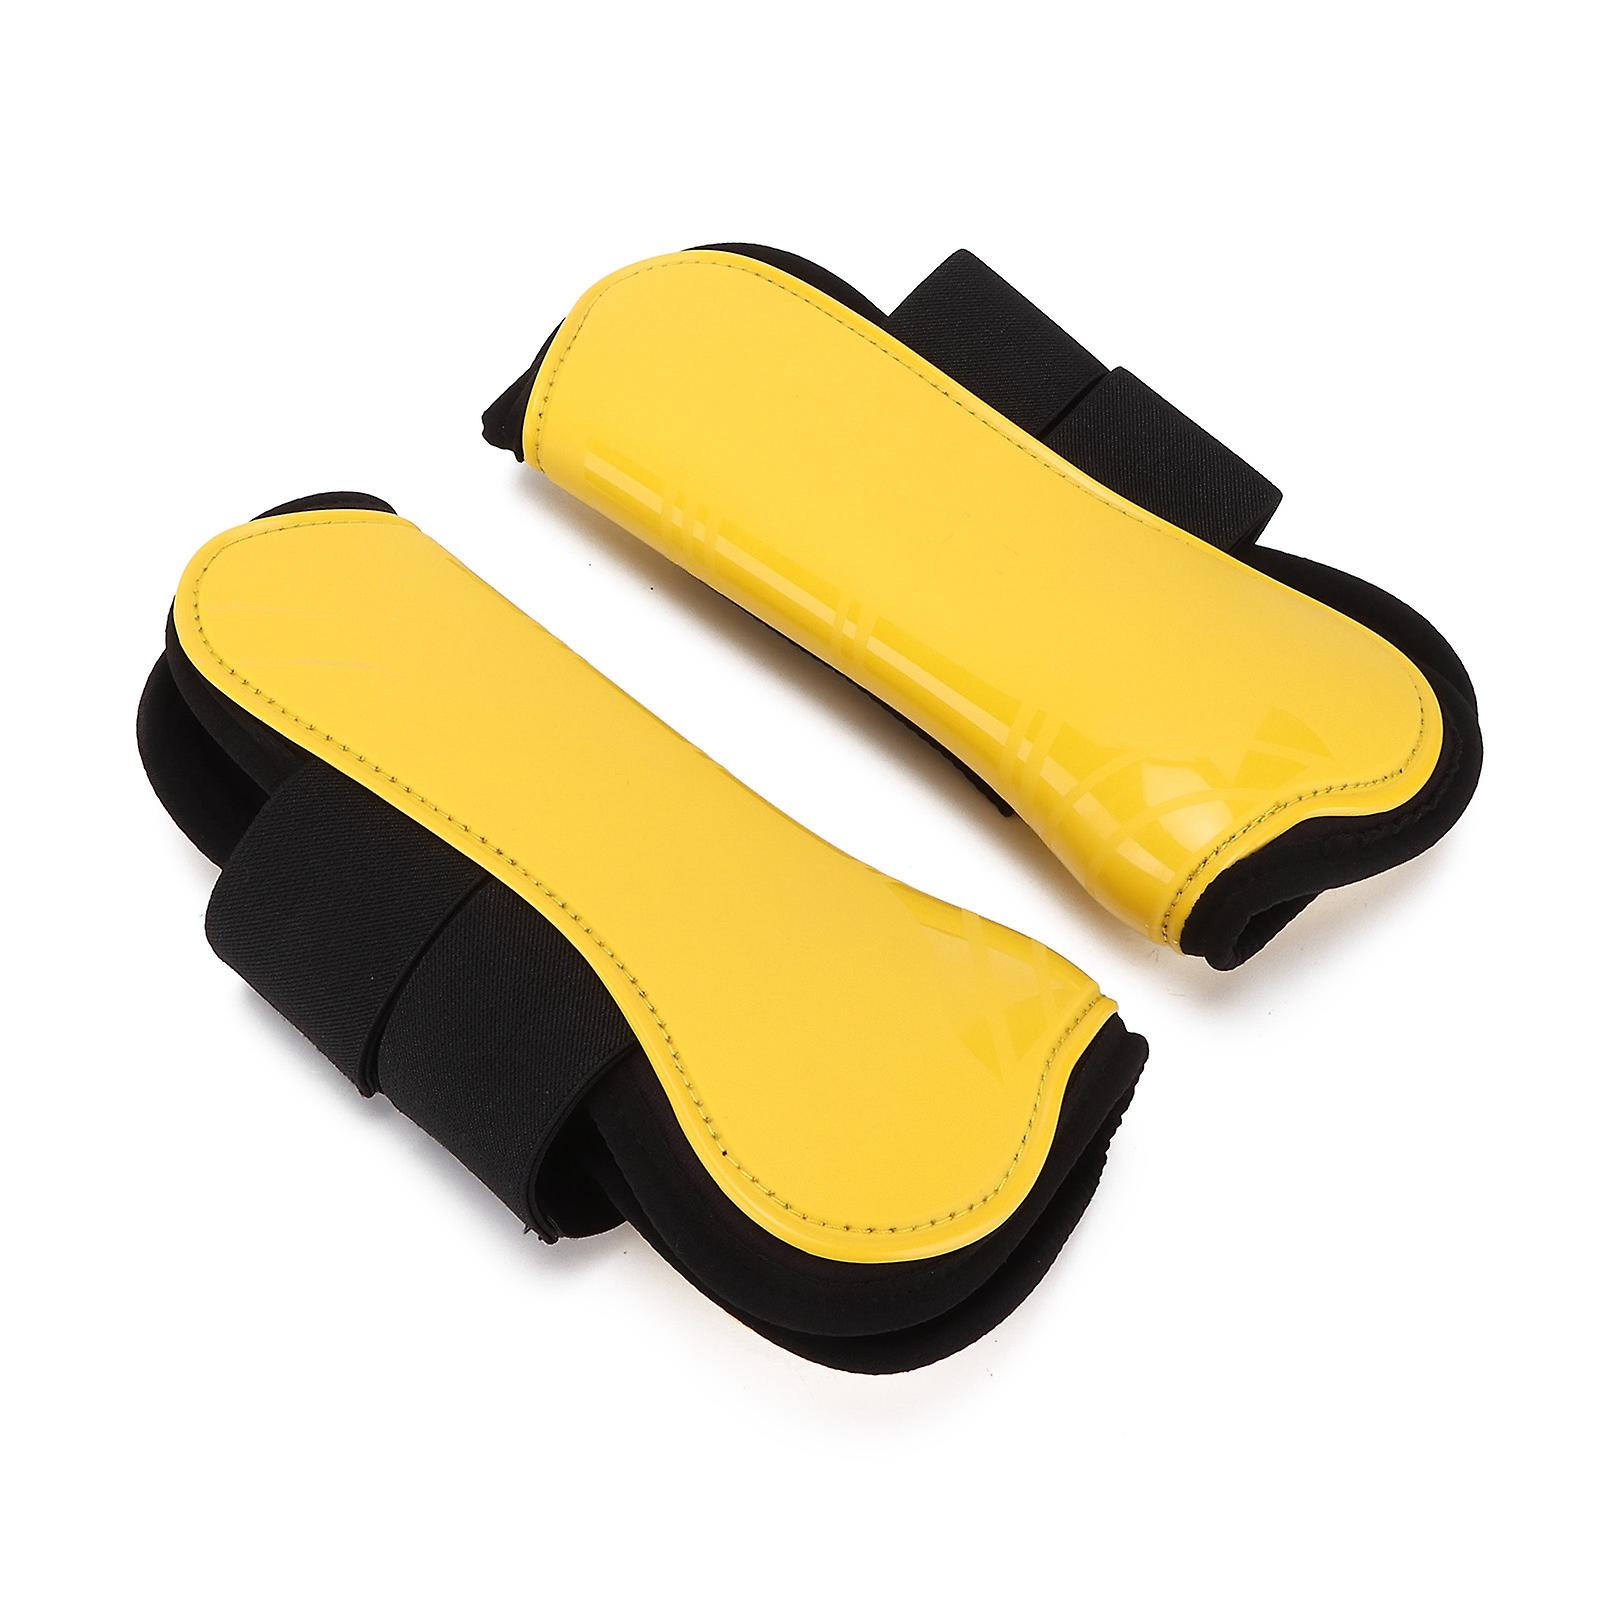 Horse Tendon Boots 4 Pcs Protective Comfortable And Adjustable Boots For Horse Jumpingyellow Set Of 2 Front Leg Boots (m)